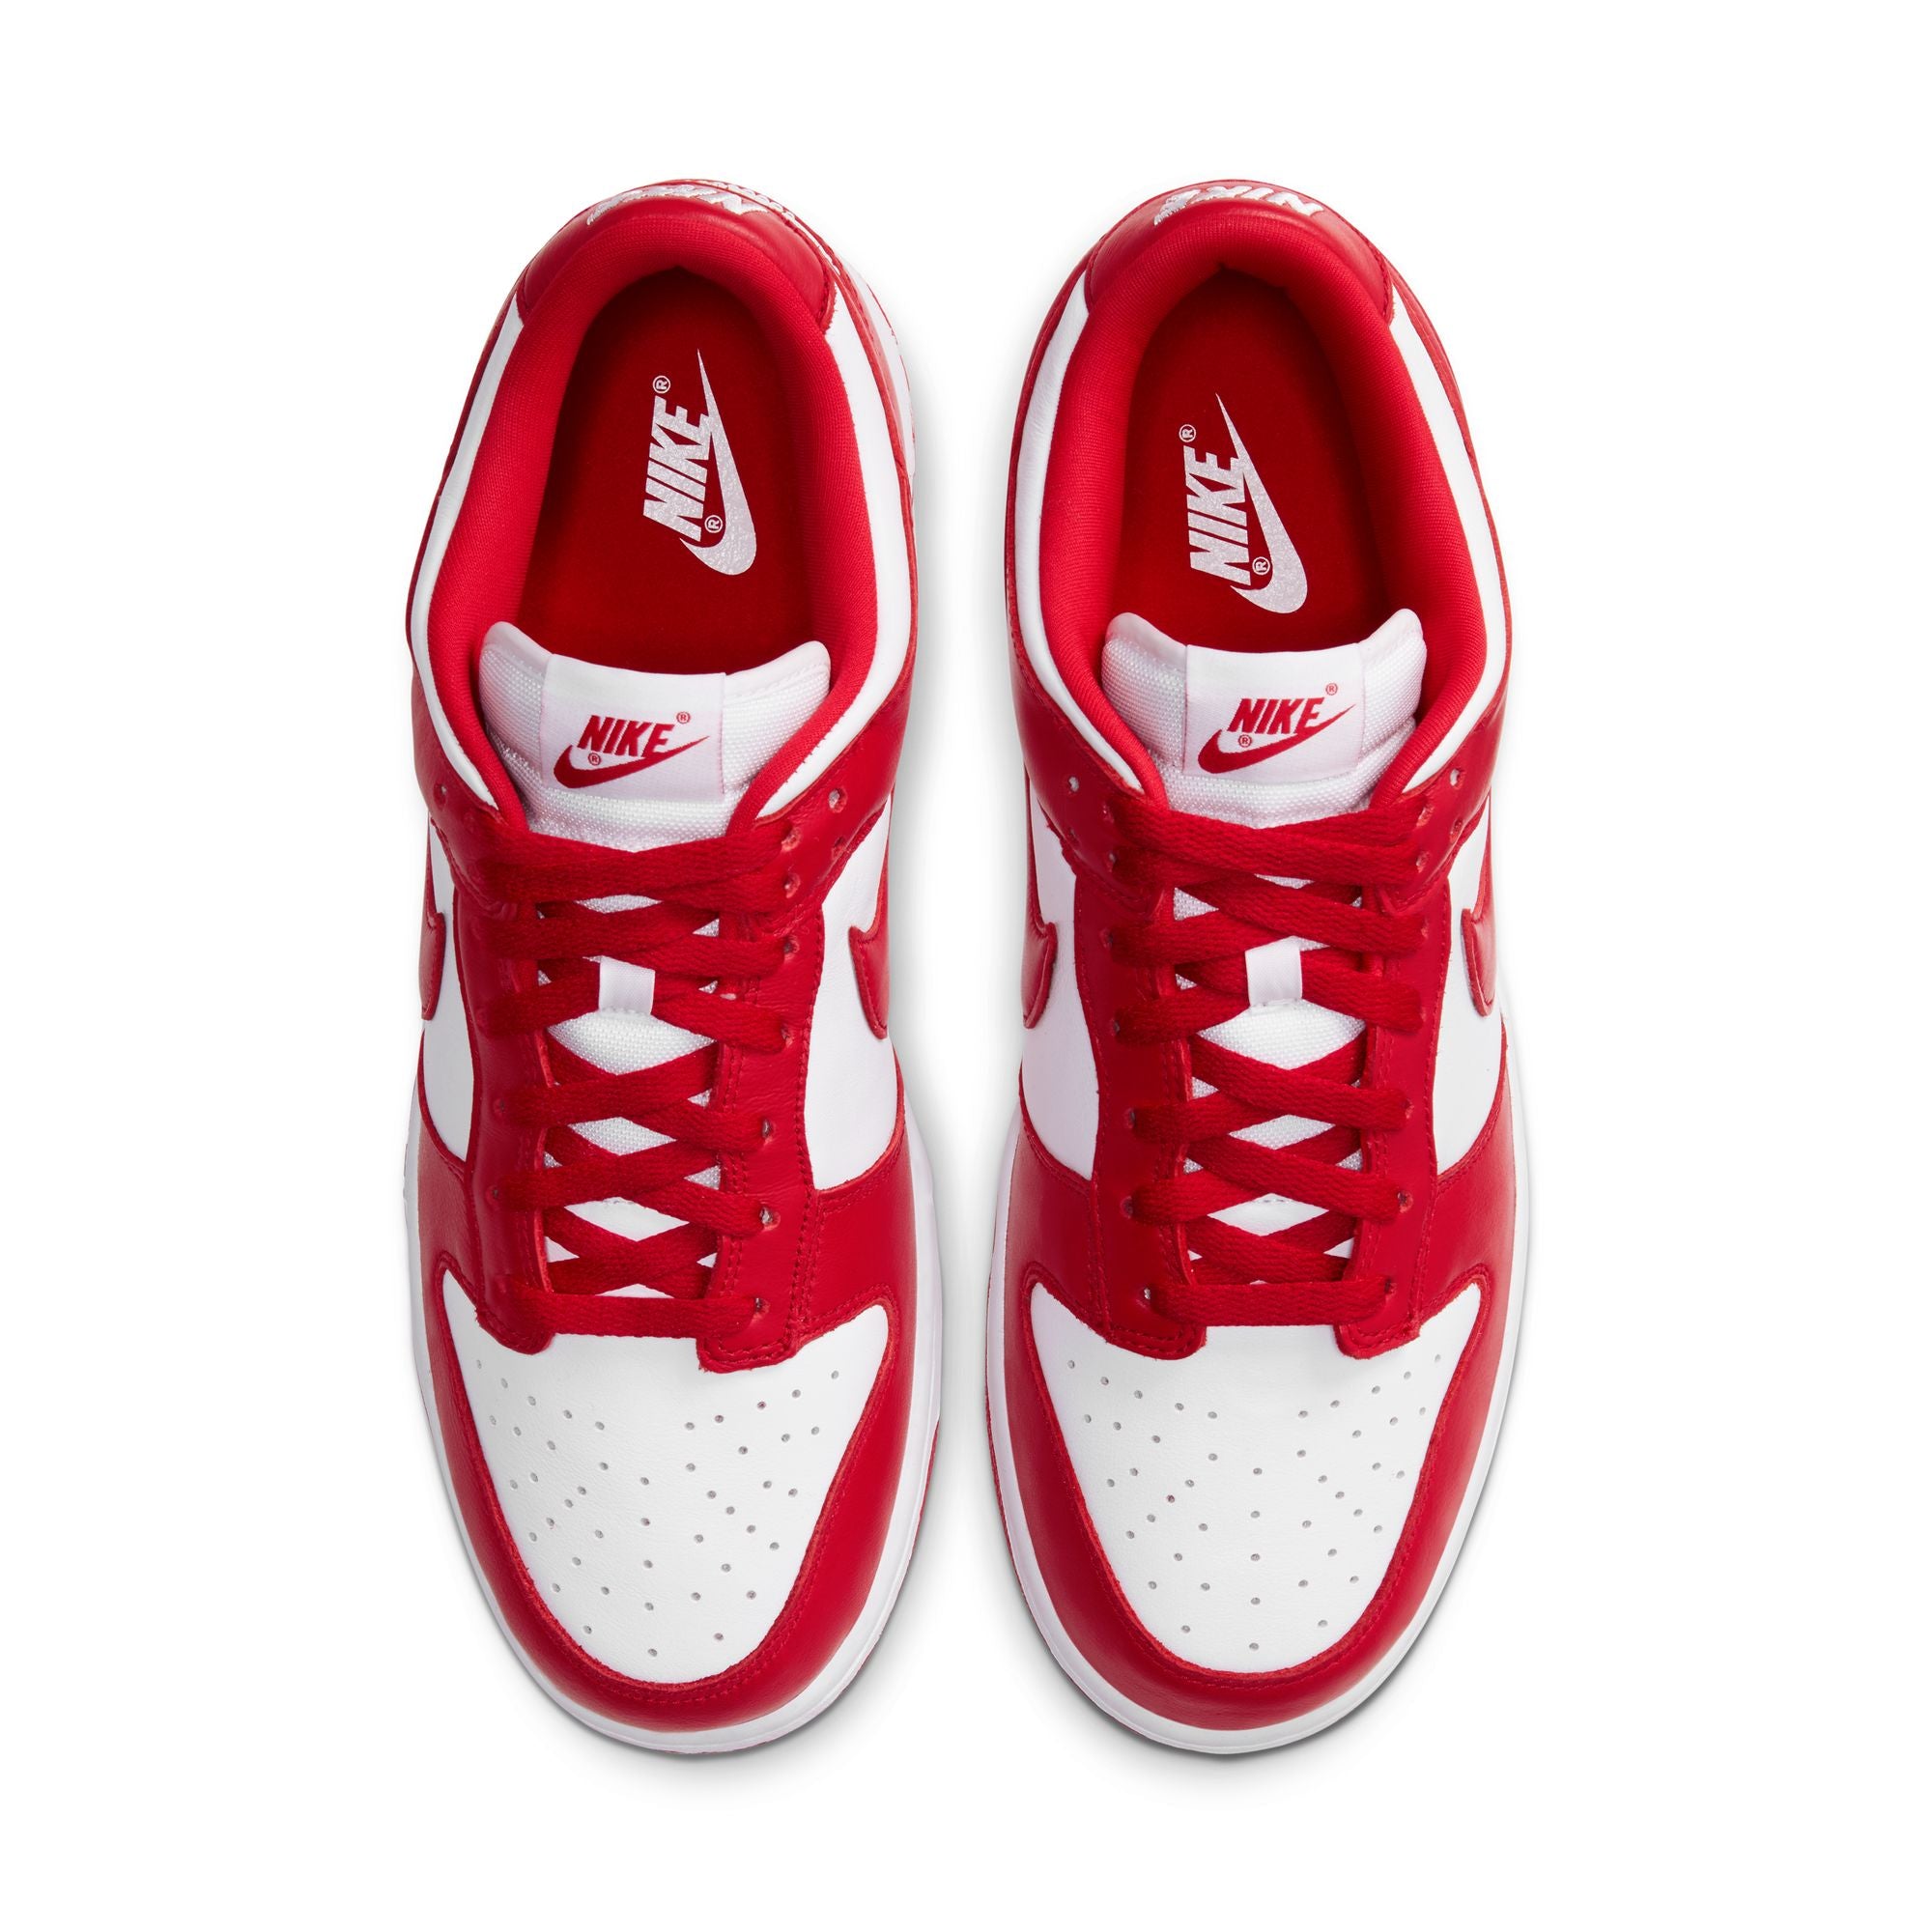 NIKE - Nike Dunk Low Sp - (White/University Red) view 5